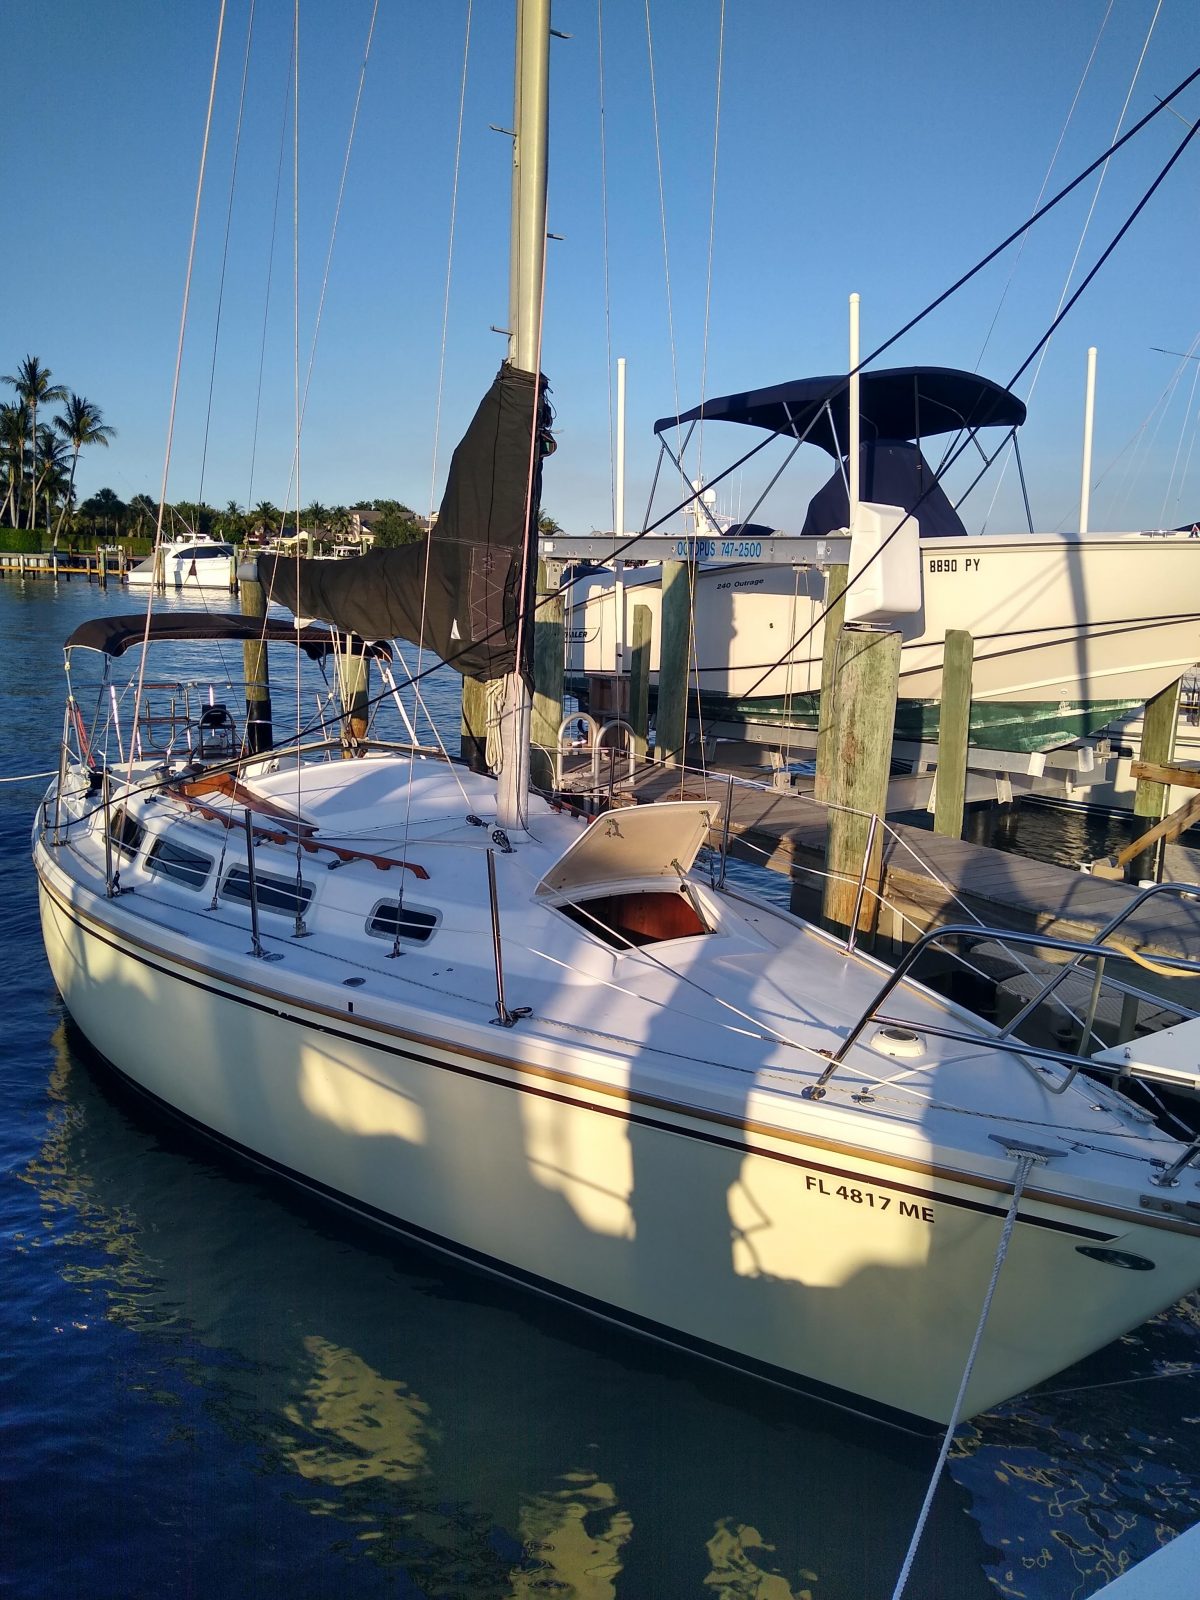 30 ft catalina sailboat for sale